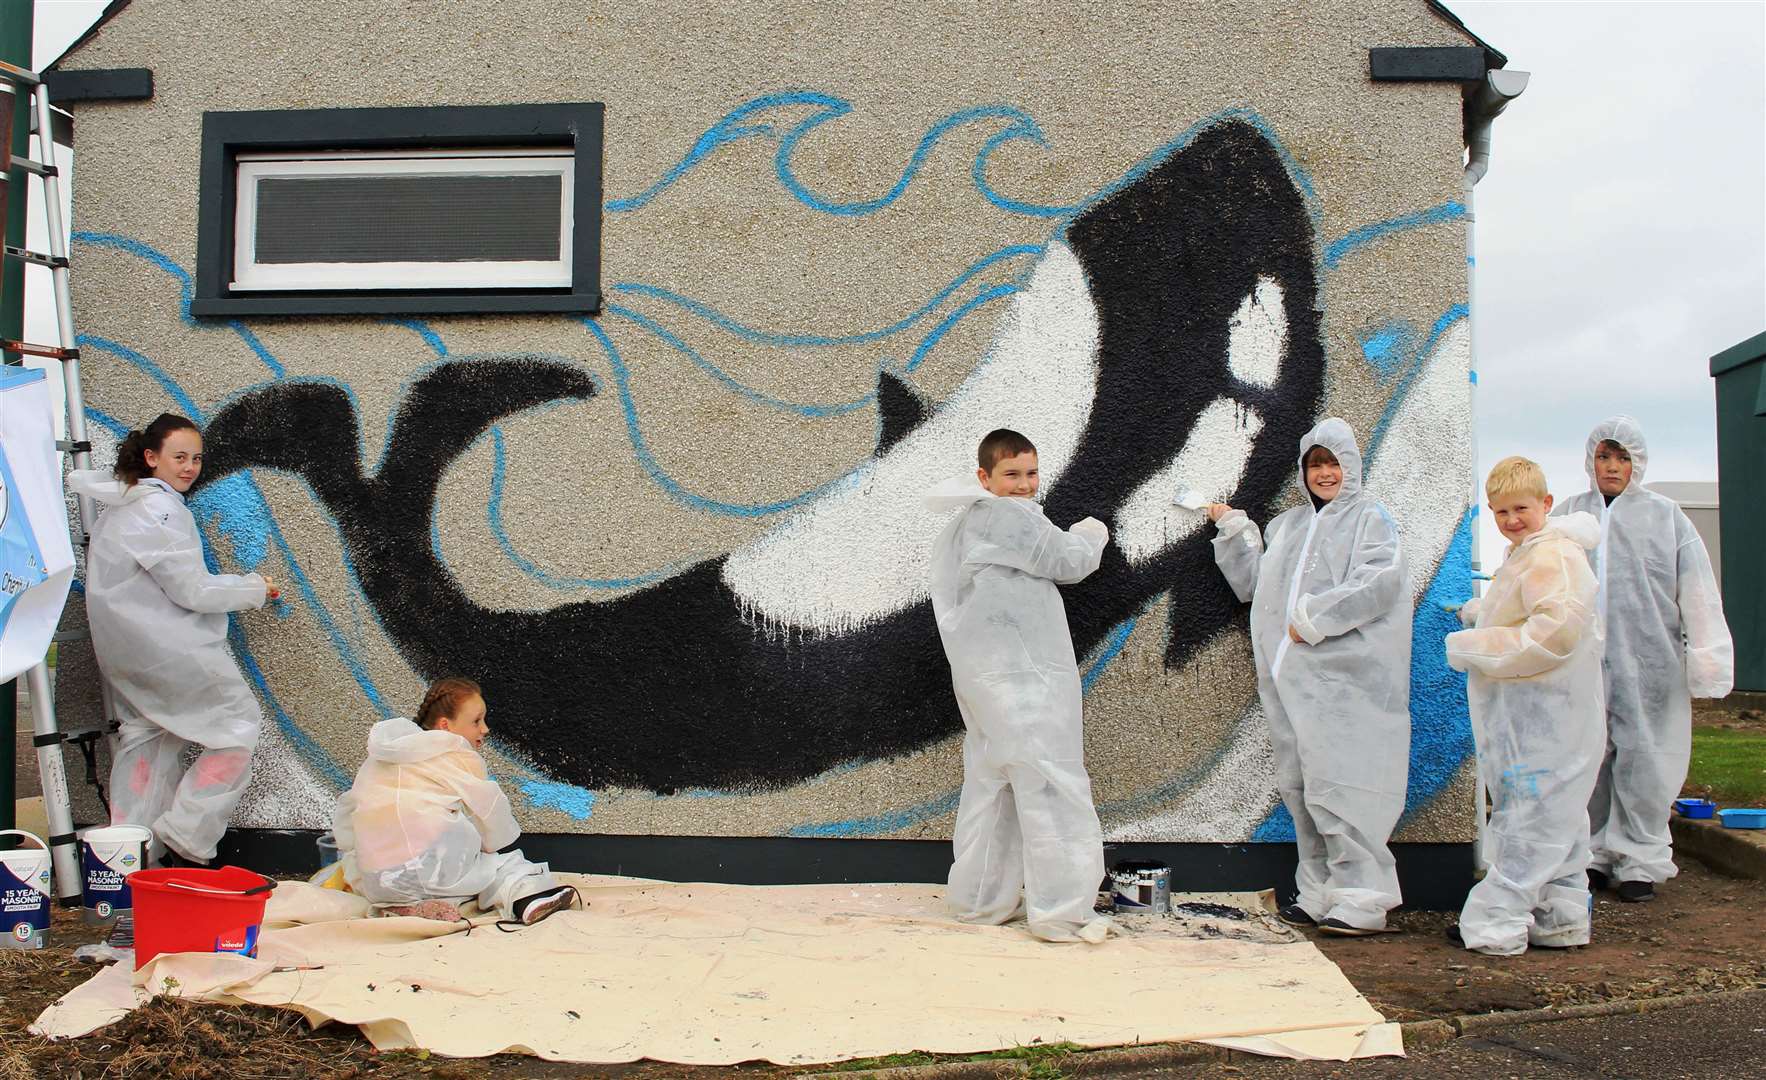 The mural well under way on Saturday afternoon, thanks to the efforts of sea cadets and youth club members.